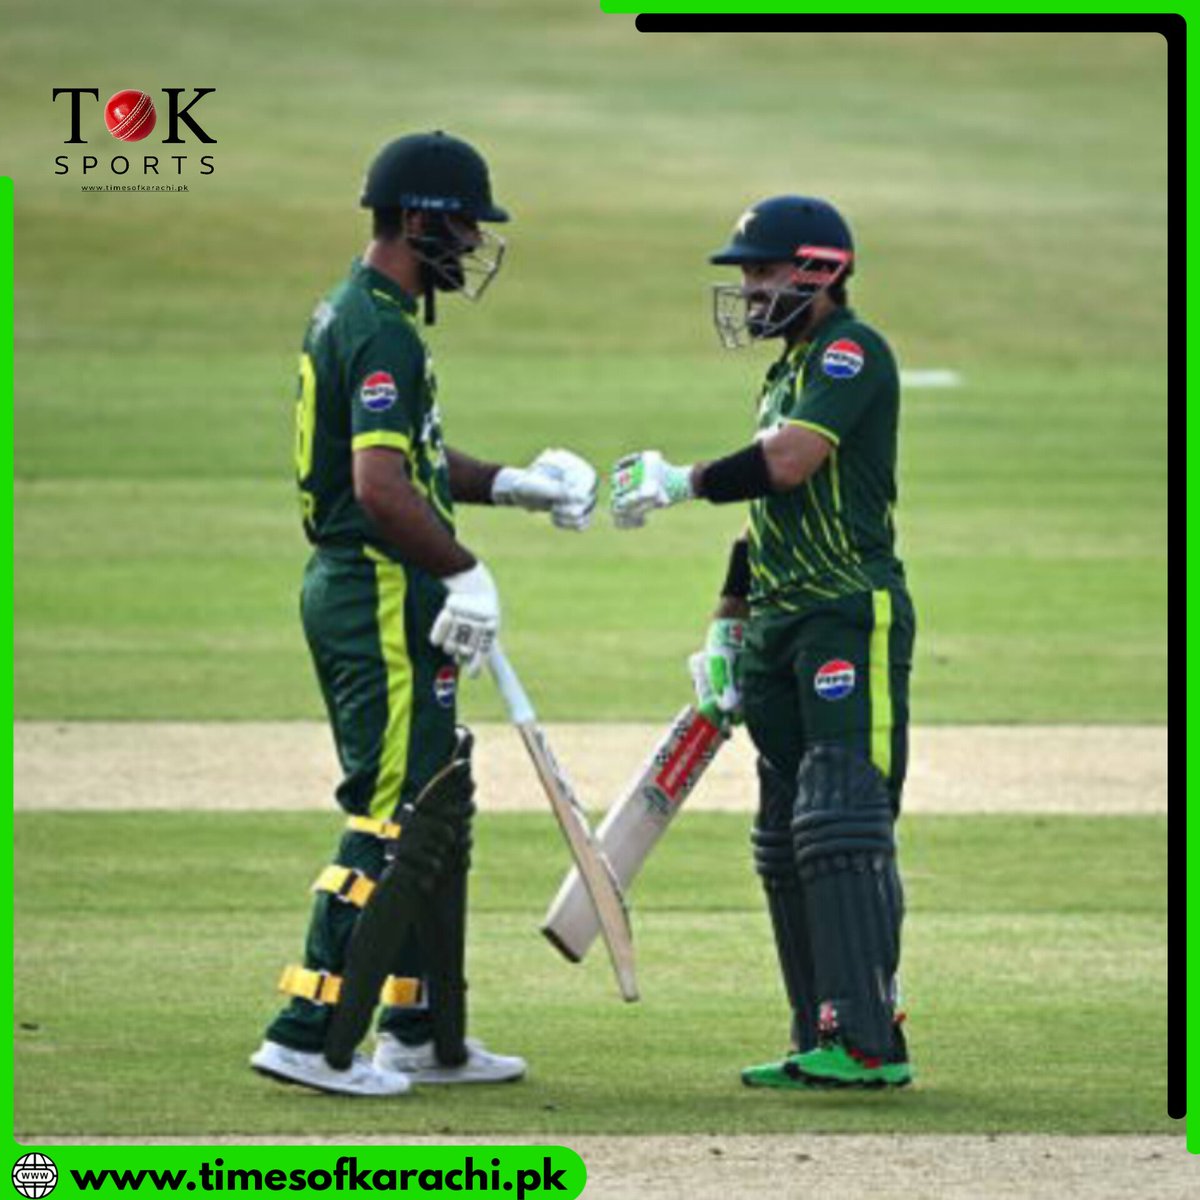 Mohammed Rizwan scored his 27th T20i fifty, and Fakhar Zaman his 13th, as Pakistan reached 135/2 after 13 overs.

#TOKSports #FakharZaman #MohammadRizwan #PakvIre